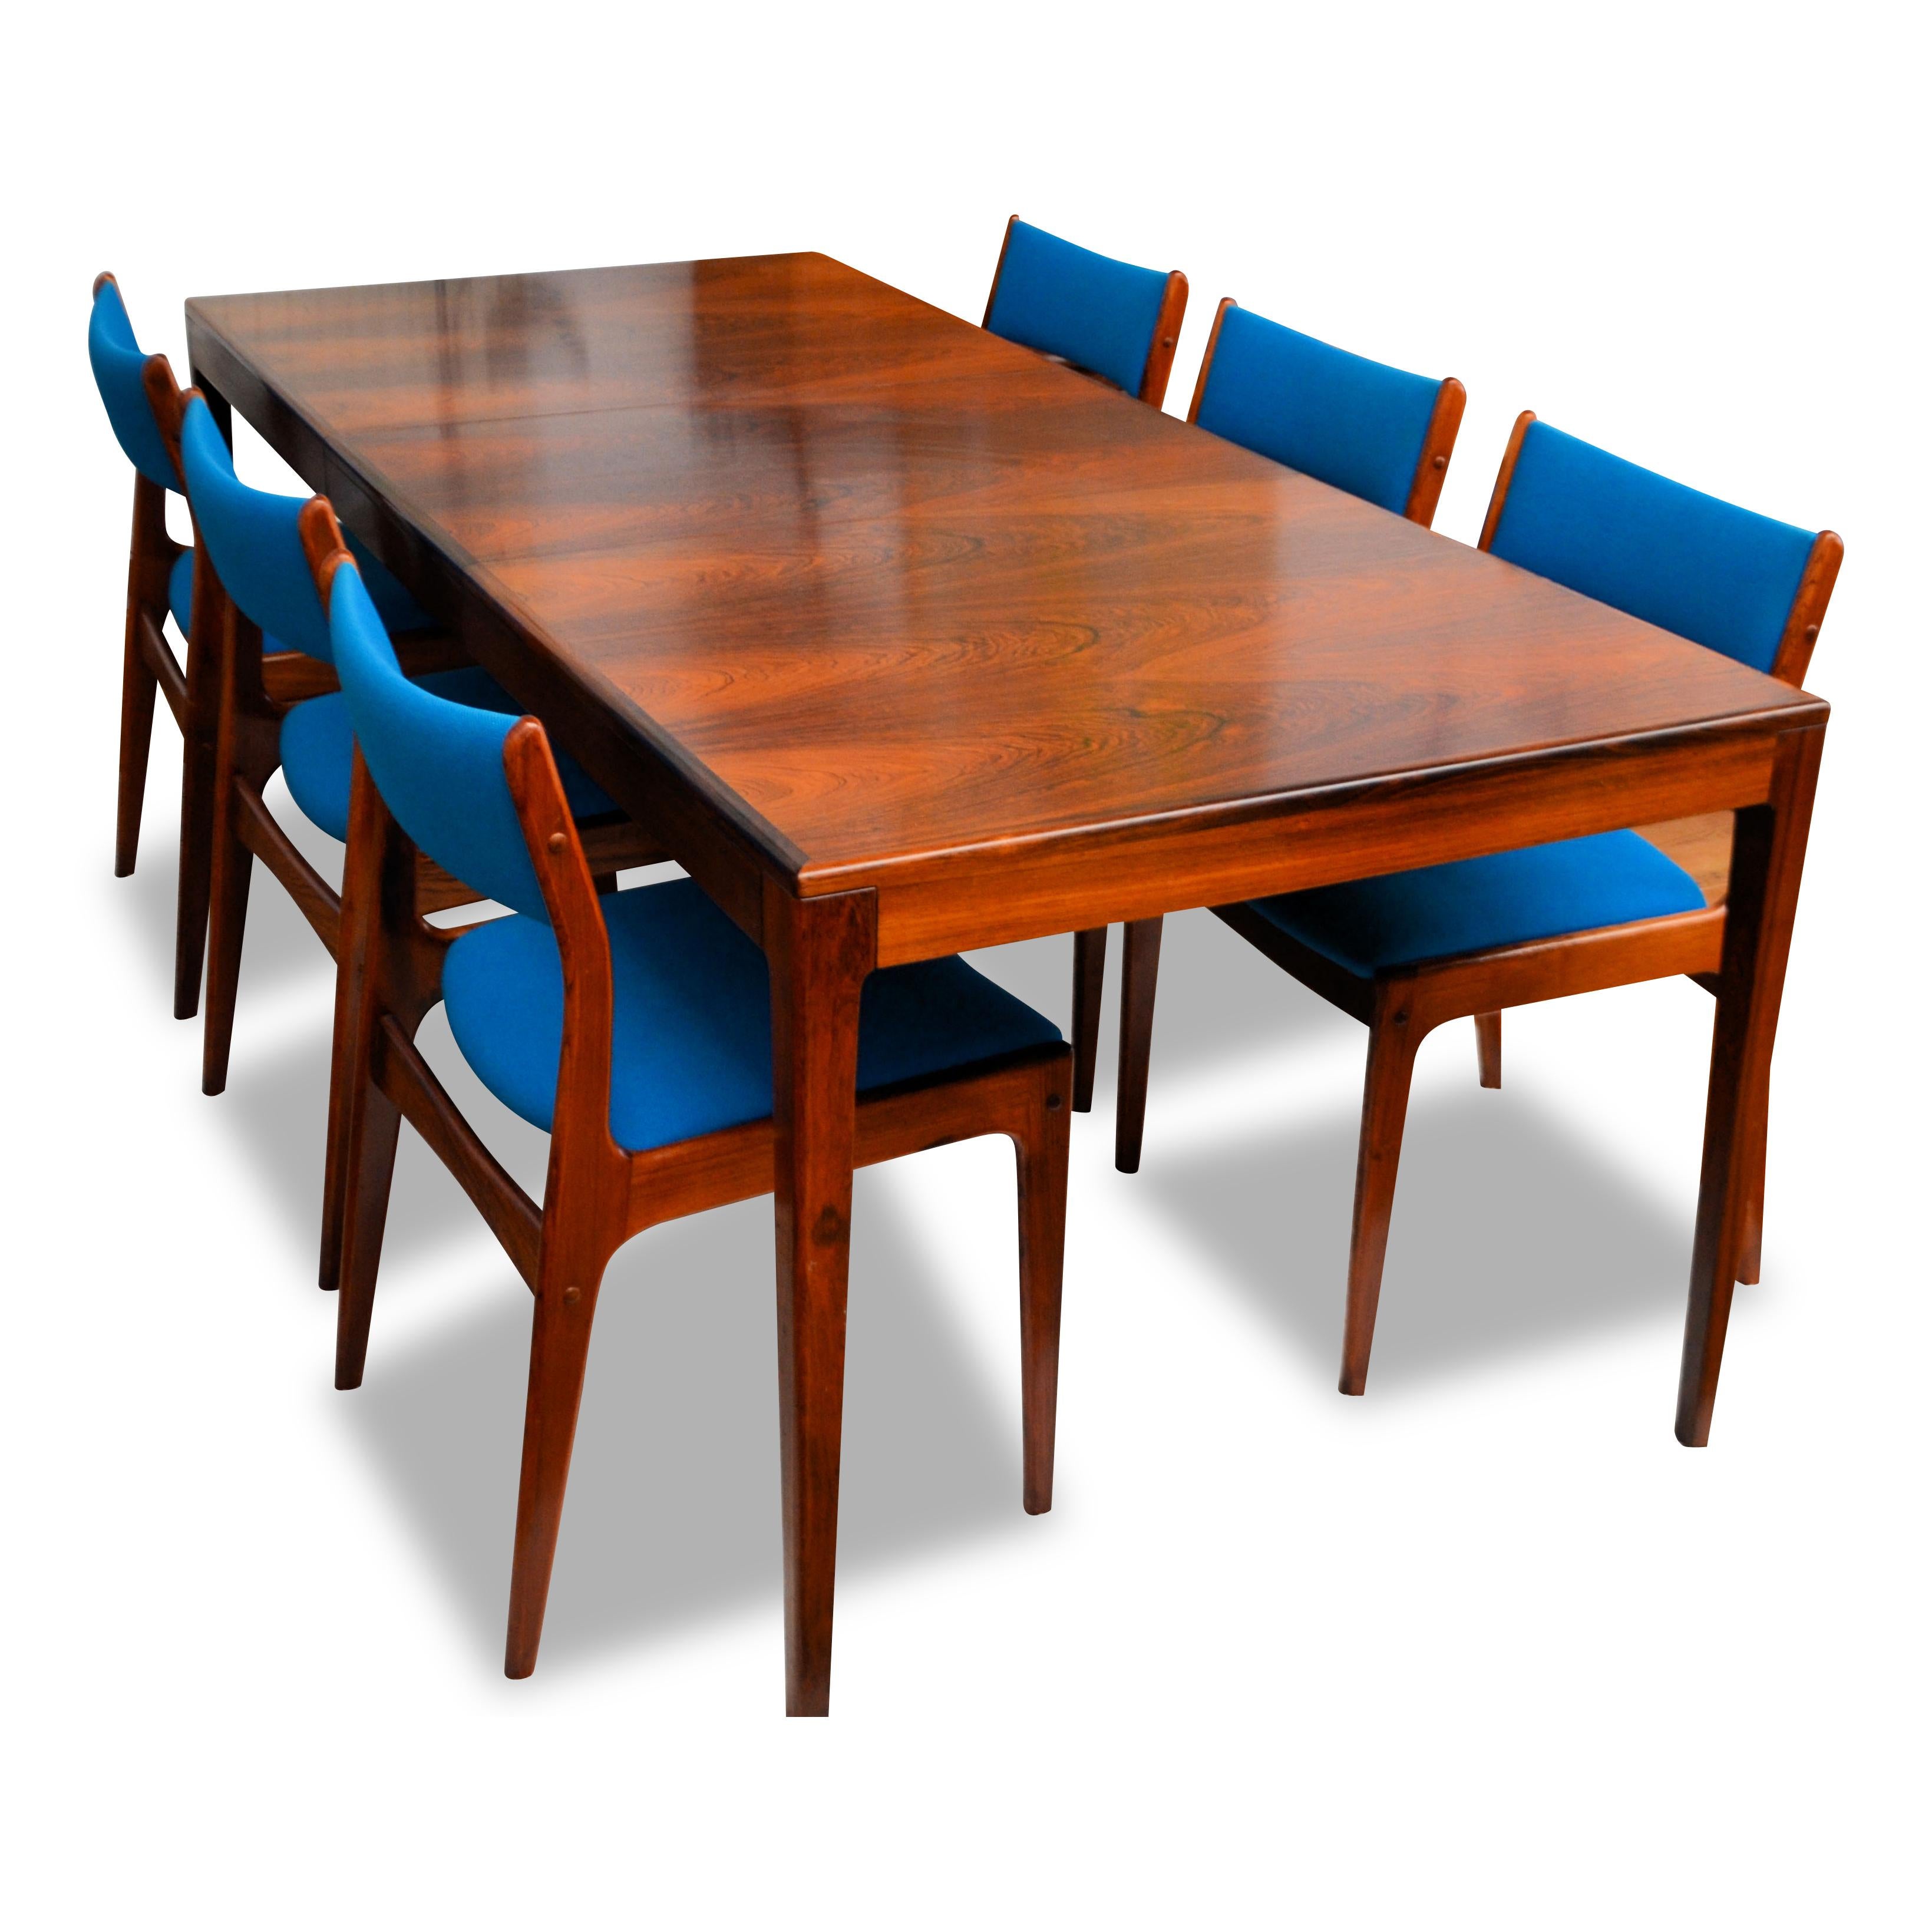 Vintage Danish design rosewood dining set, consisting of a rosewood extendable designed by C.J. Rosengaarden, combined with a set of six rosewood dining room chairs, designed by Johannes Andersen. High-end Danish modern design featuring a clean,